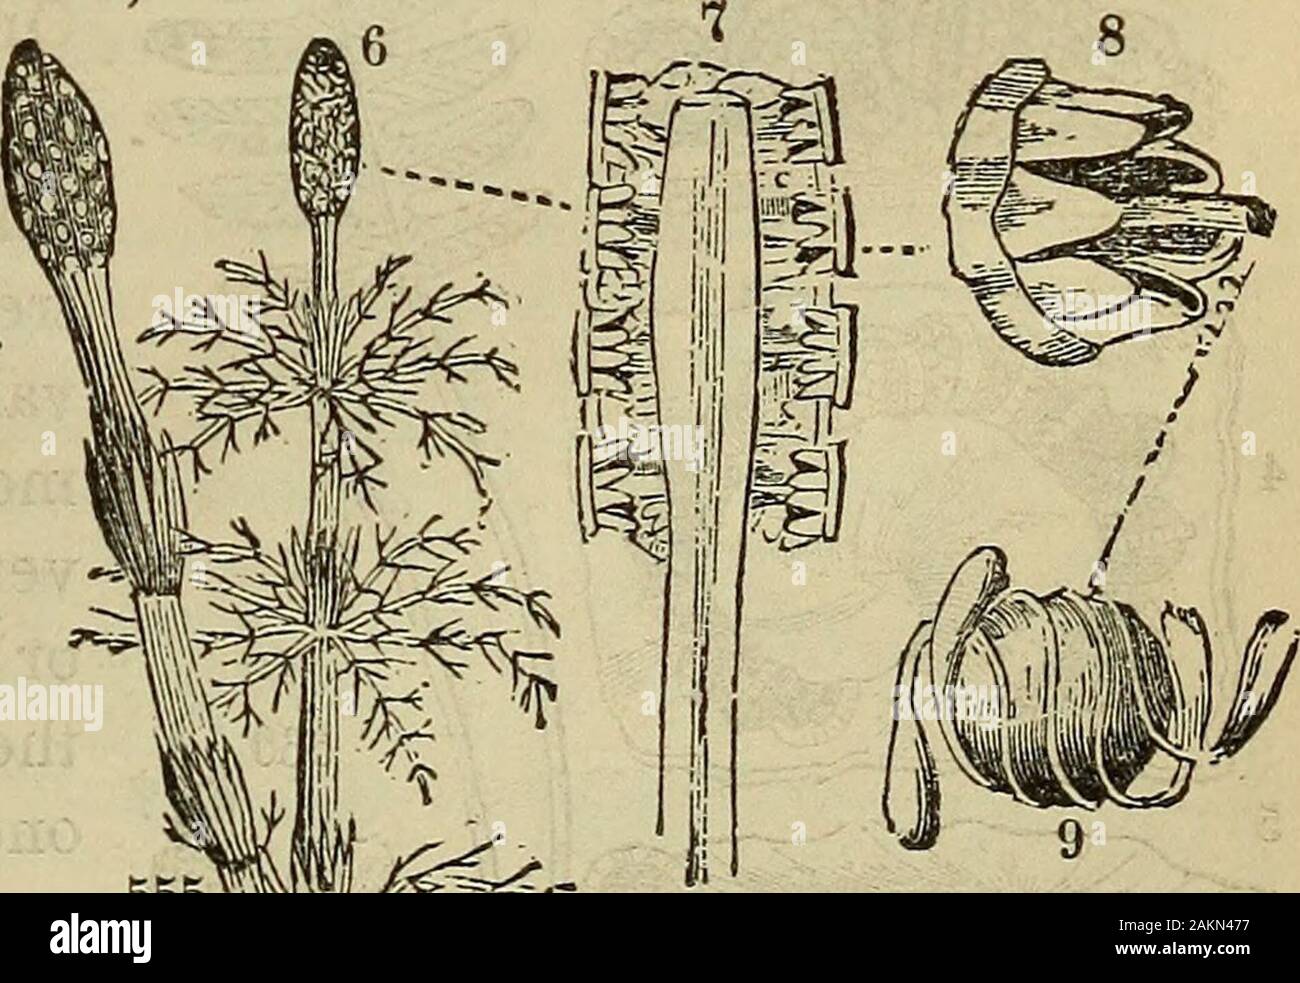 The American botanist and florist; including lessons in the structure, life, and growth of plants; together with a simple analytical flora, descriptive of the native and cultivated plants growing in the Atlantic division of the American union . stems, or with whorled branches. Stems striate-sulcate, jointed, fistular between, and separable at, the joints. Sheathsdentate, crowning each internode. Fructification a dense, oblong-cylin-dric, terminal, and cone-like spike, composed of 6-sided, peltate scales,arranged spirally, bearing beneath 4—7 spore-cases, Mhich open laterally.Spores globular, e Stock Photo